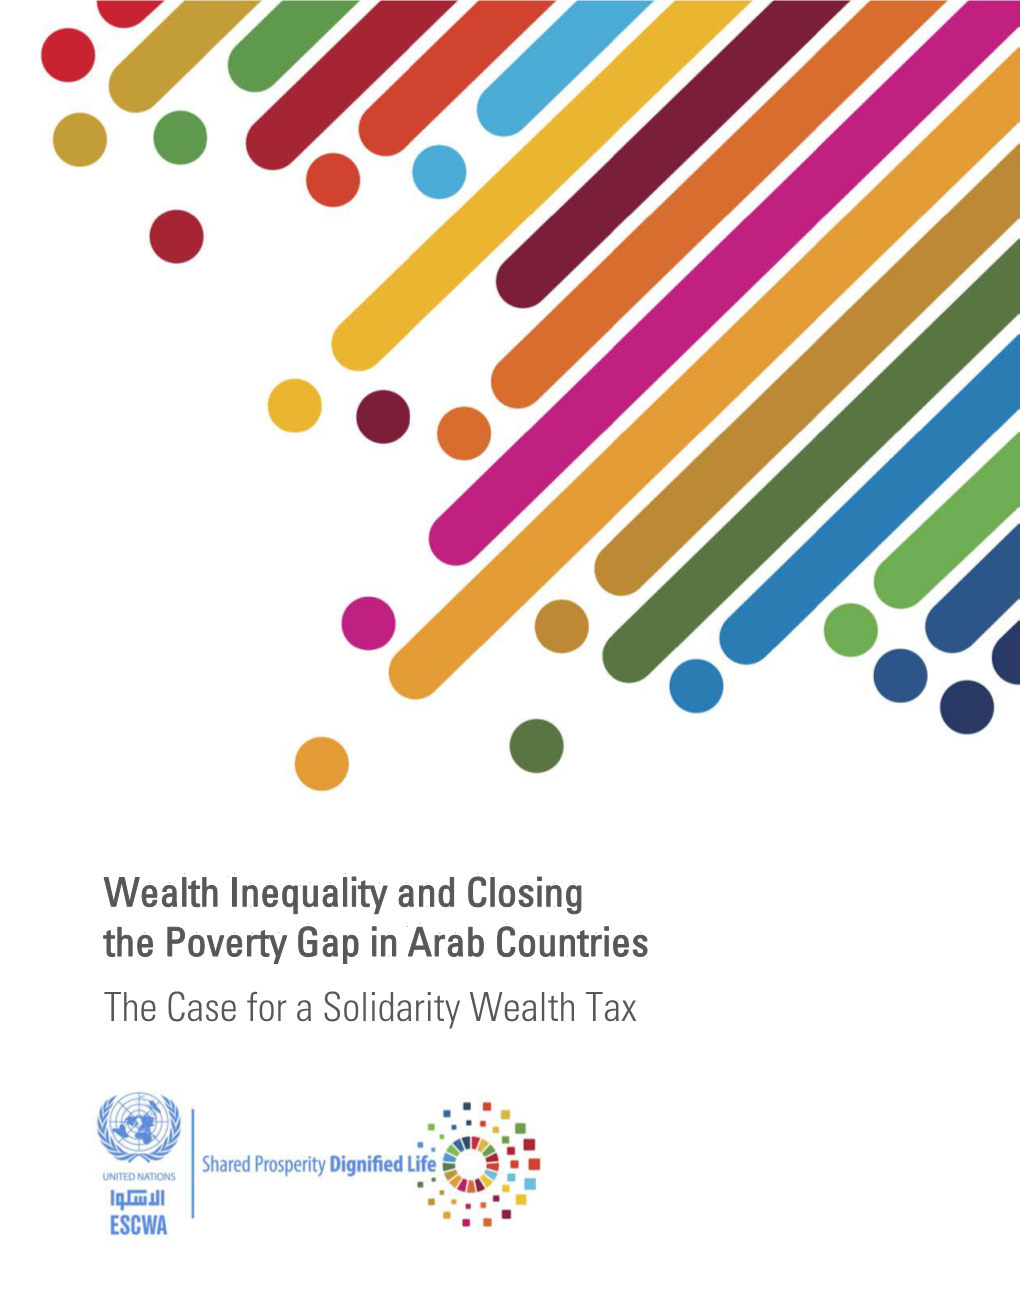 Wealth Inequality and Closing the Poverty Gap in Arab Countries the Case for a Solidarity Wealth Tax